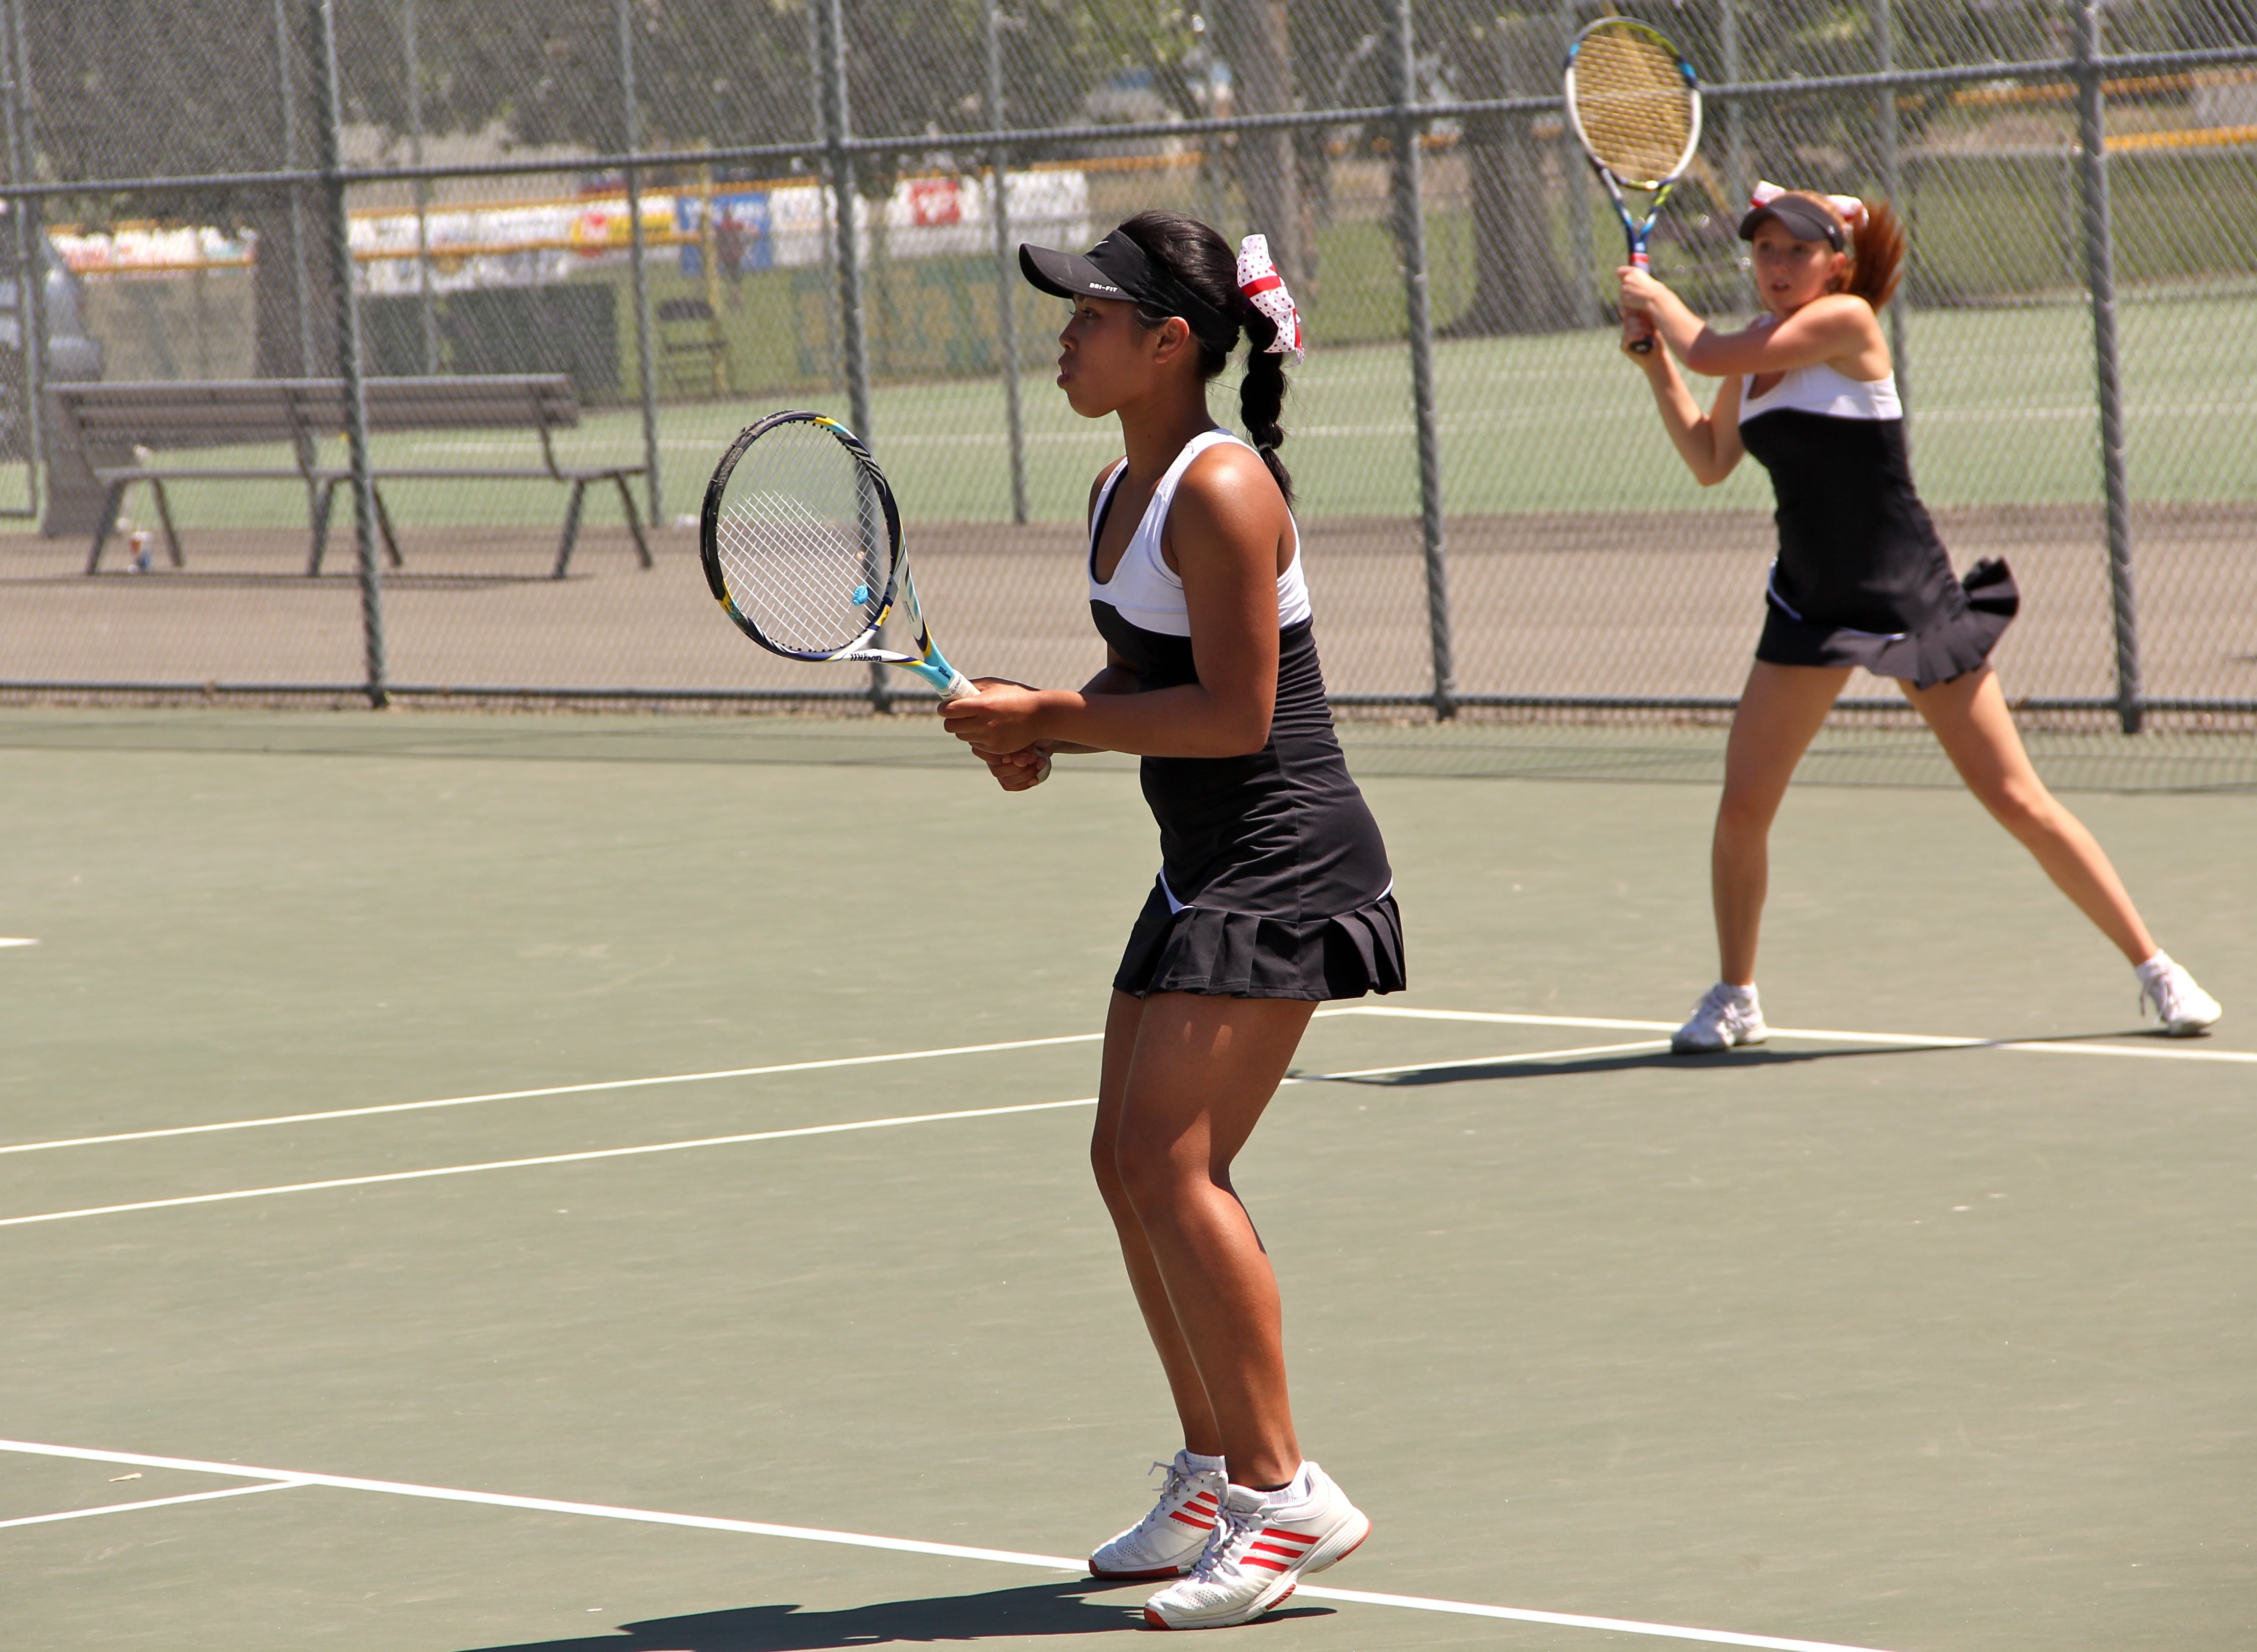 Hannah Gianan and Jen Lewis serve for a point during the state tennis tournament, in Richland.